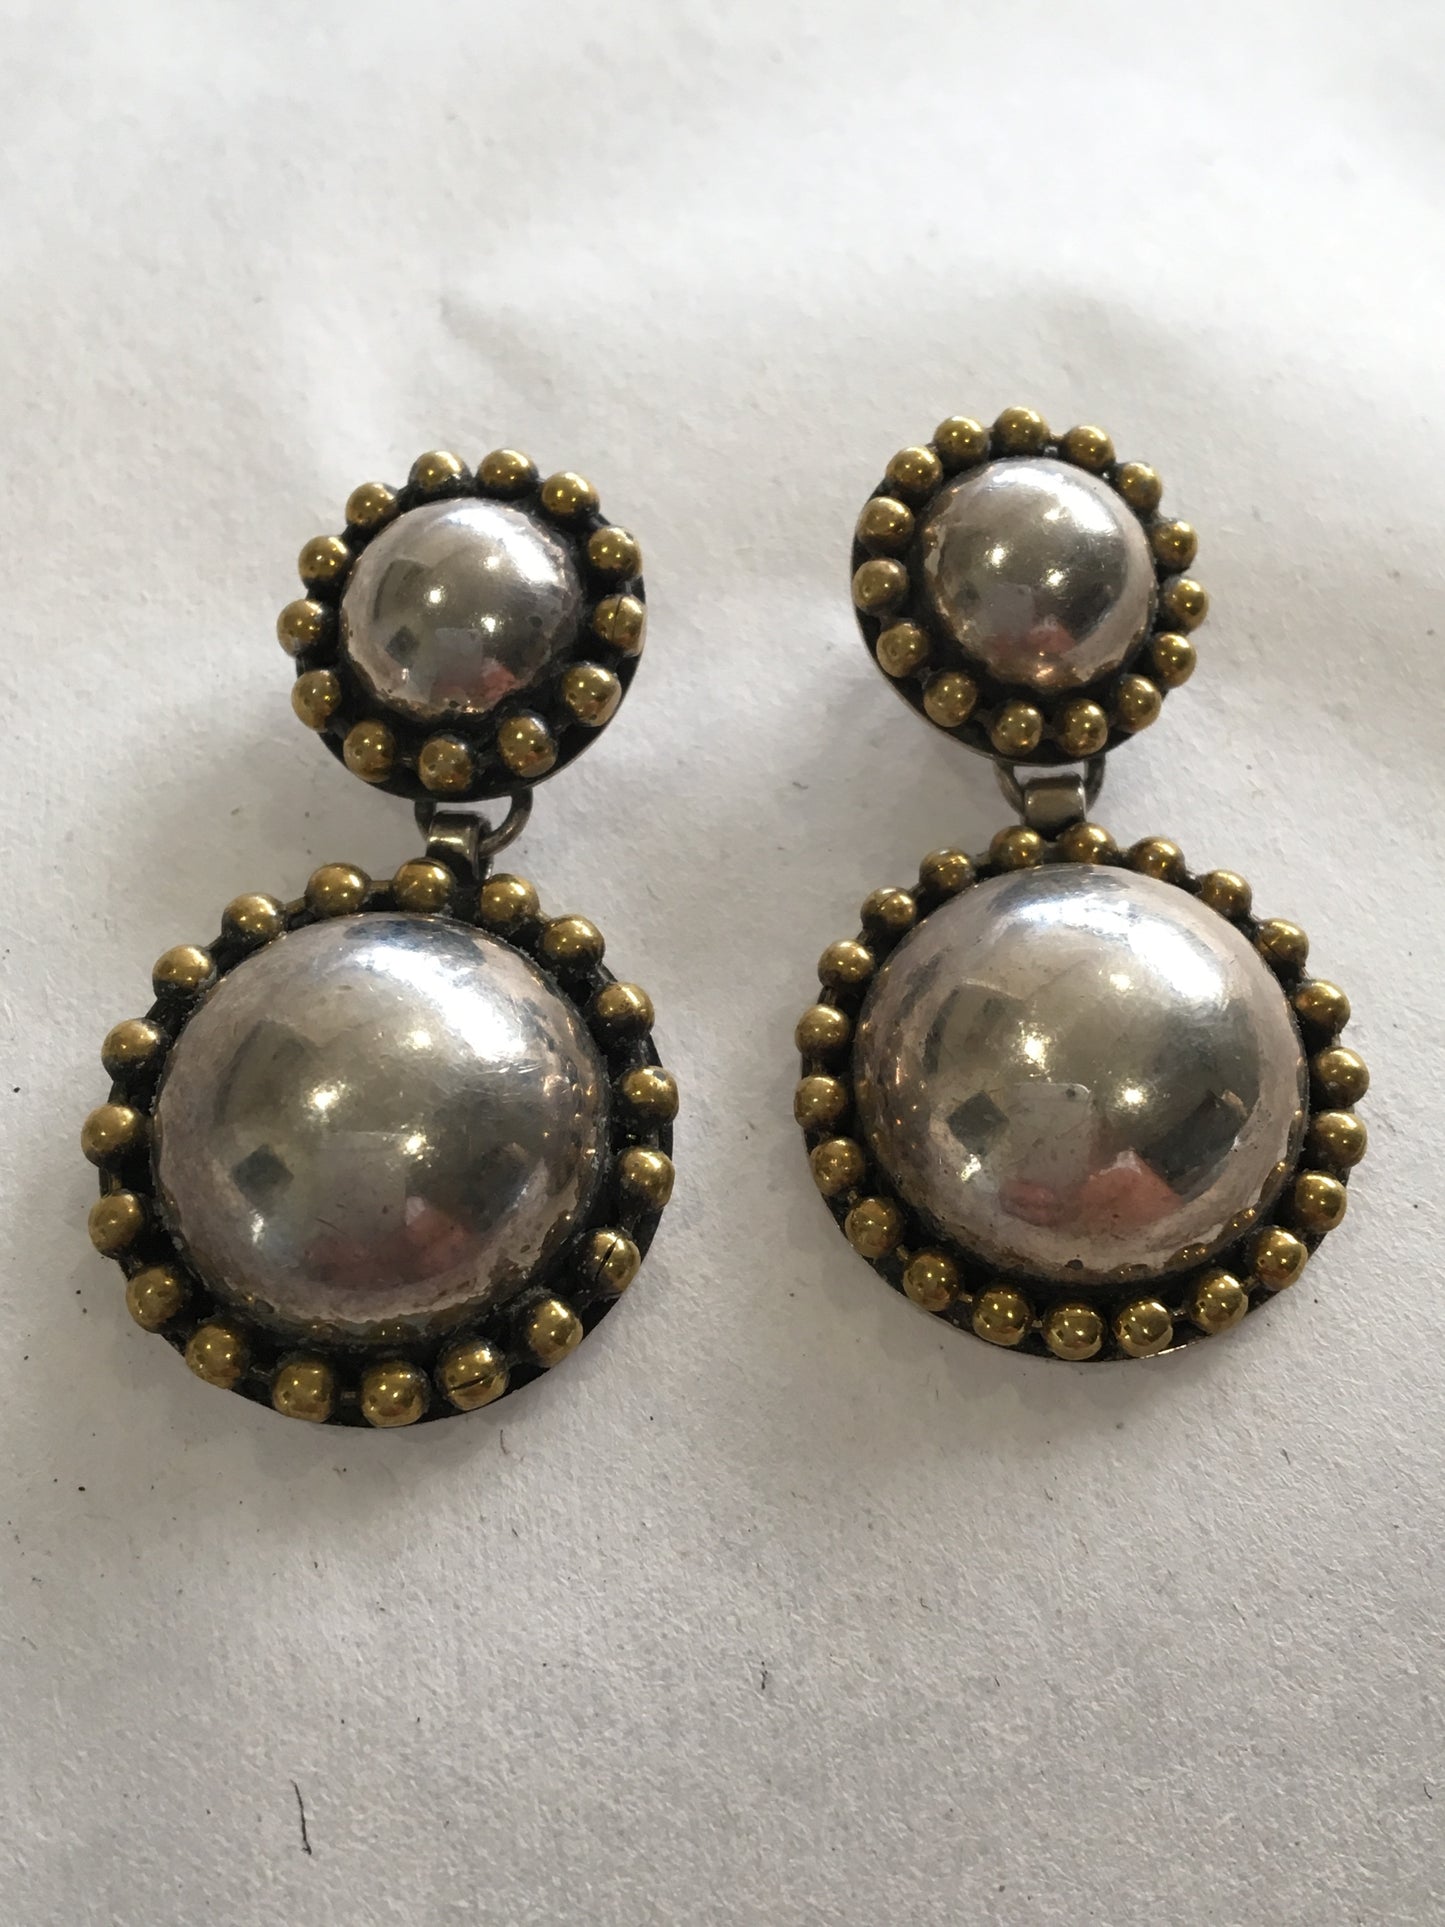 SOLD TAXCO MEXICO ROUND MOON DANGLE EARRINGS STERLING SILVER 925